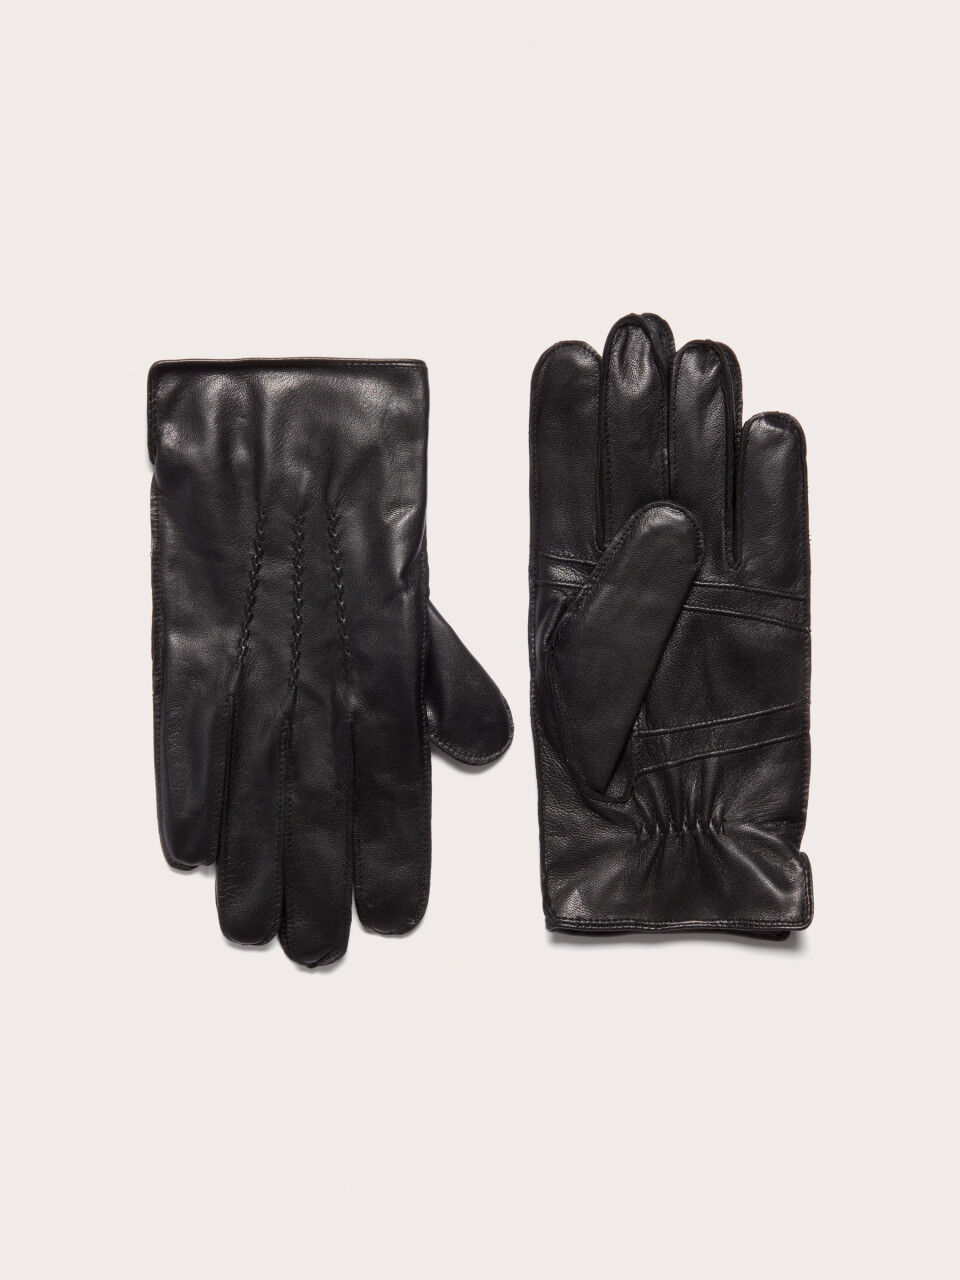 100% leather gloves